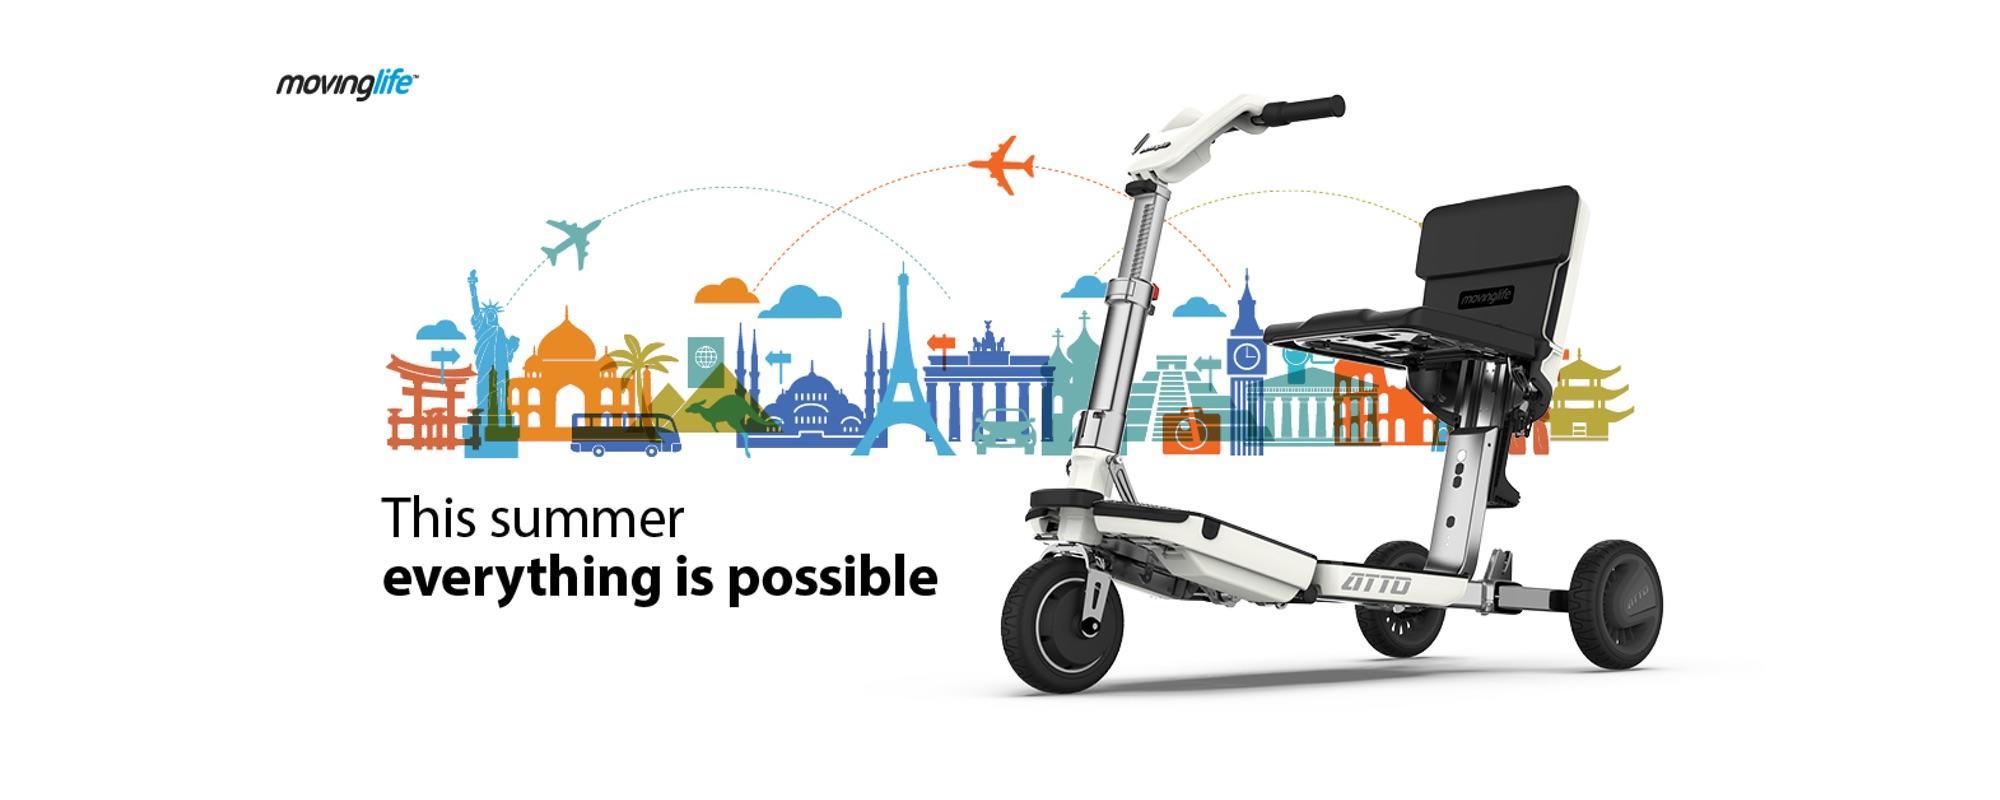 Atto mobility scooter